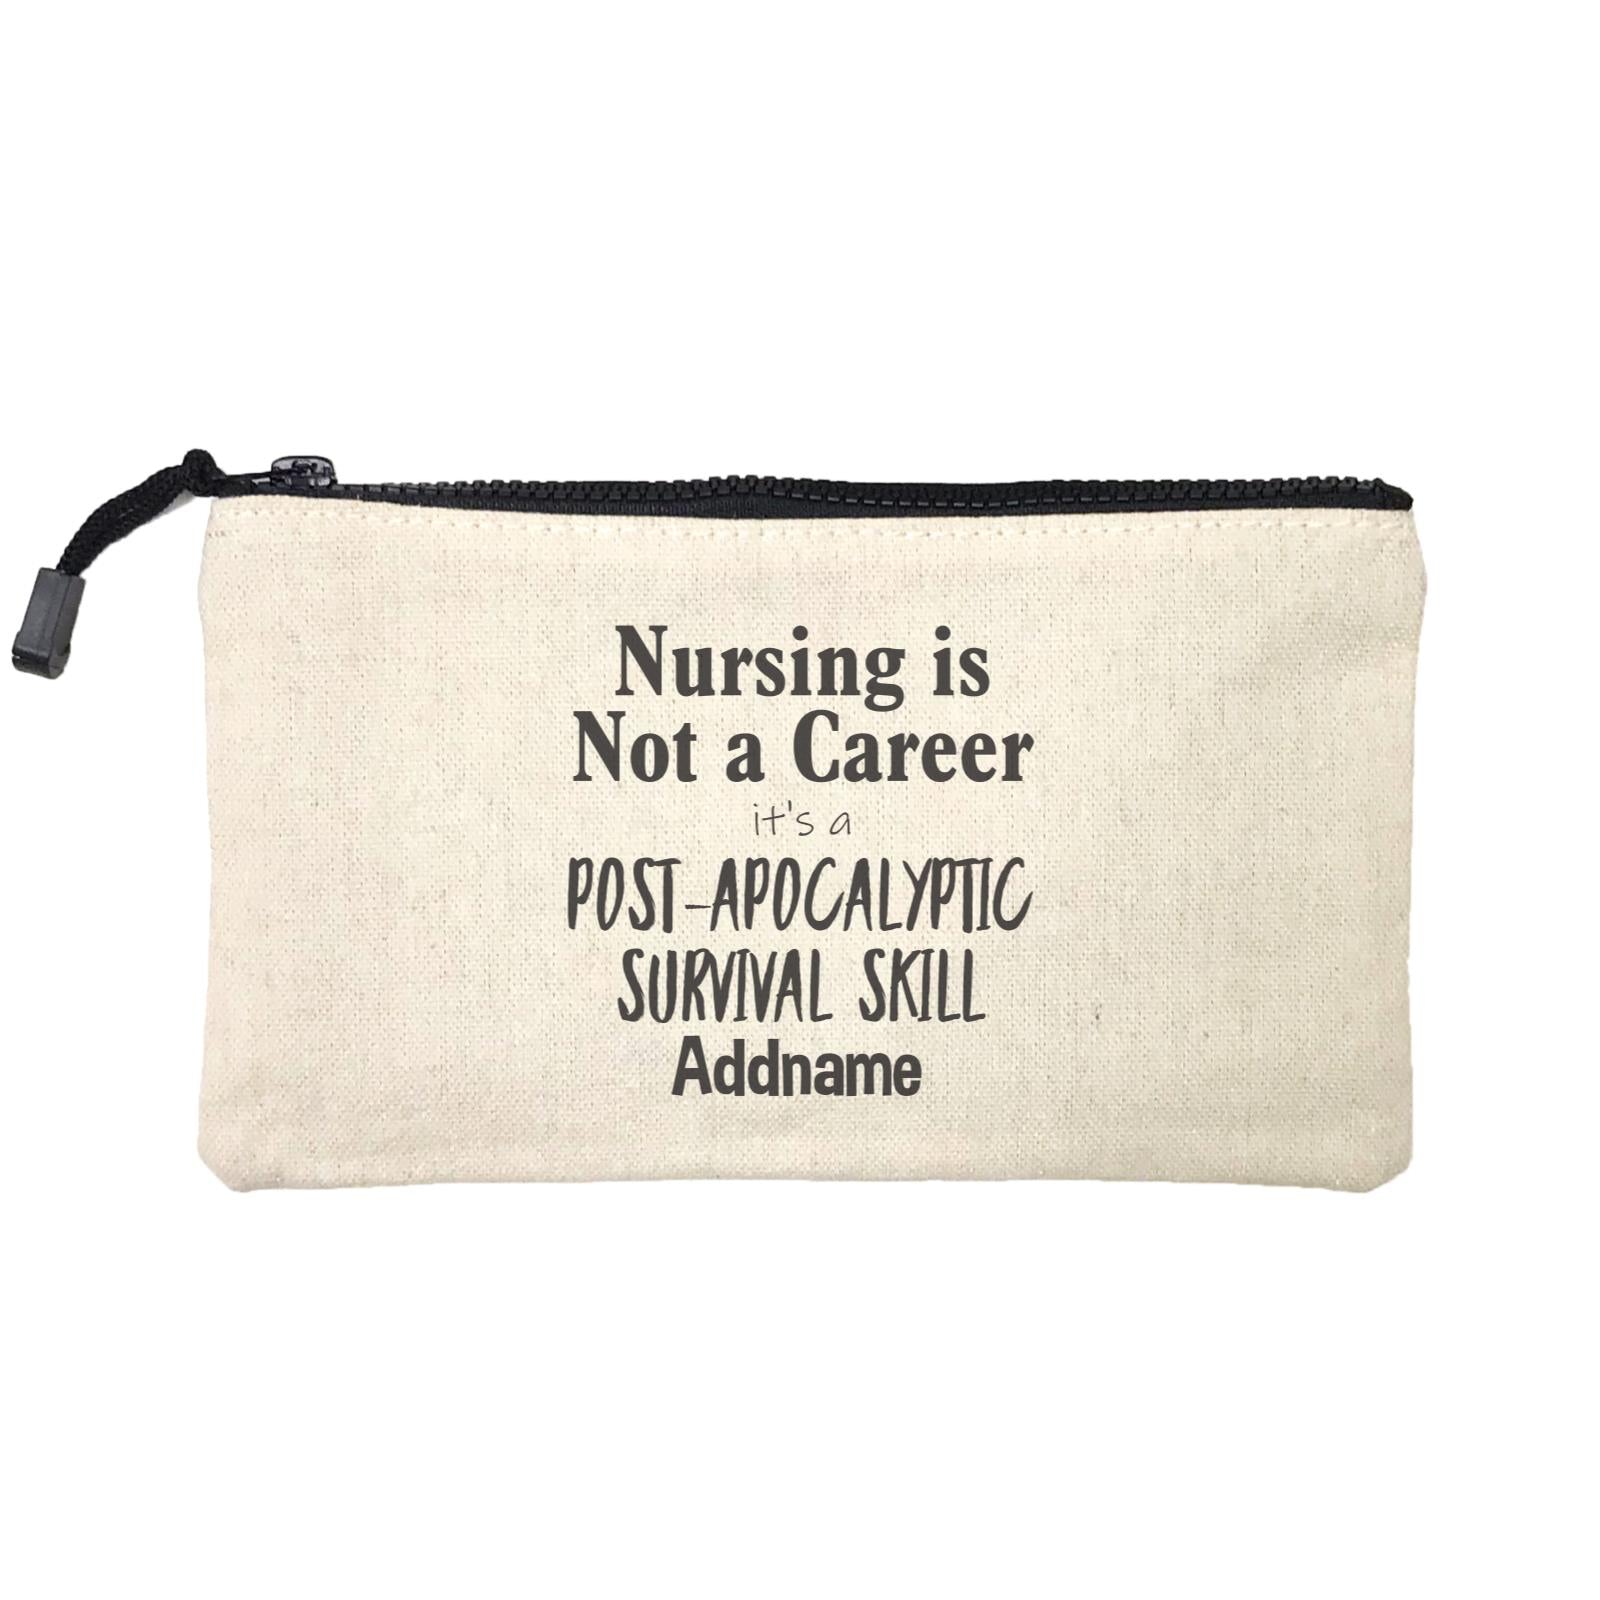 Nursing is Not a Career, It's a Post-Apocalyptic Survival Skill Mini Accessories Stationery Pouch